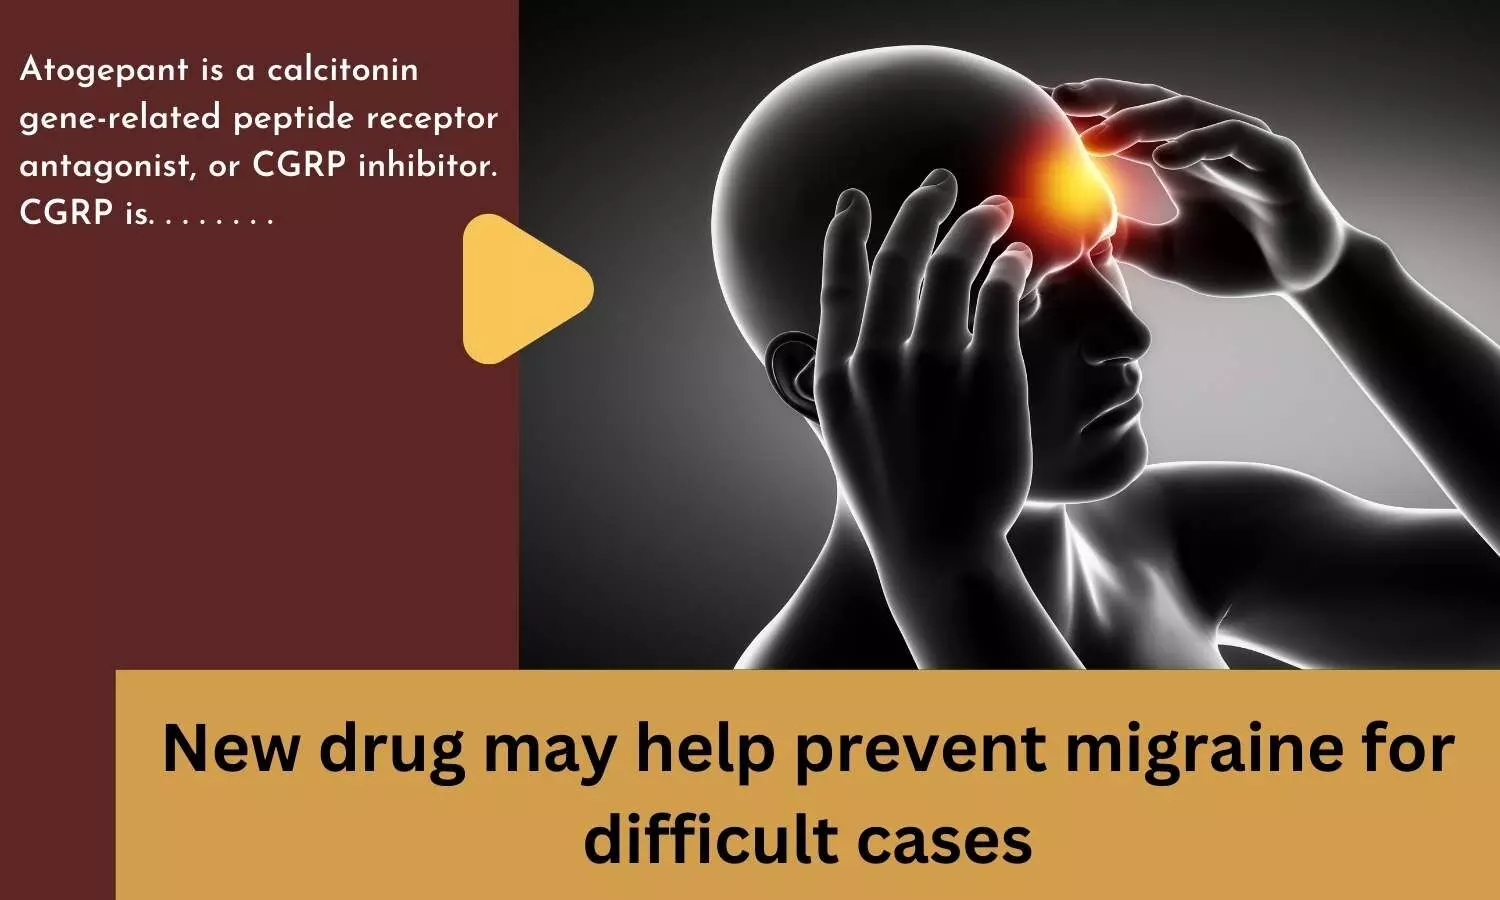 New drug may help prevent migraine for difficult cases